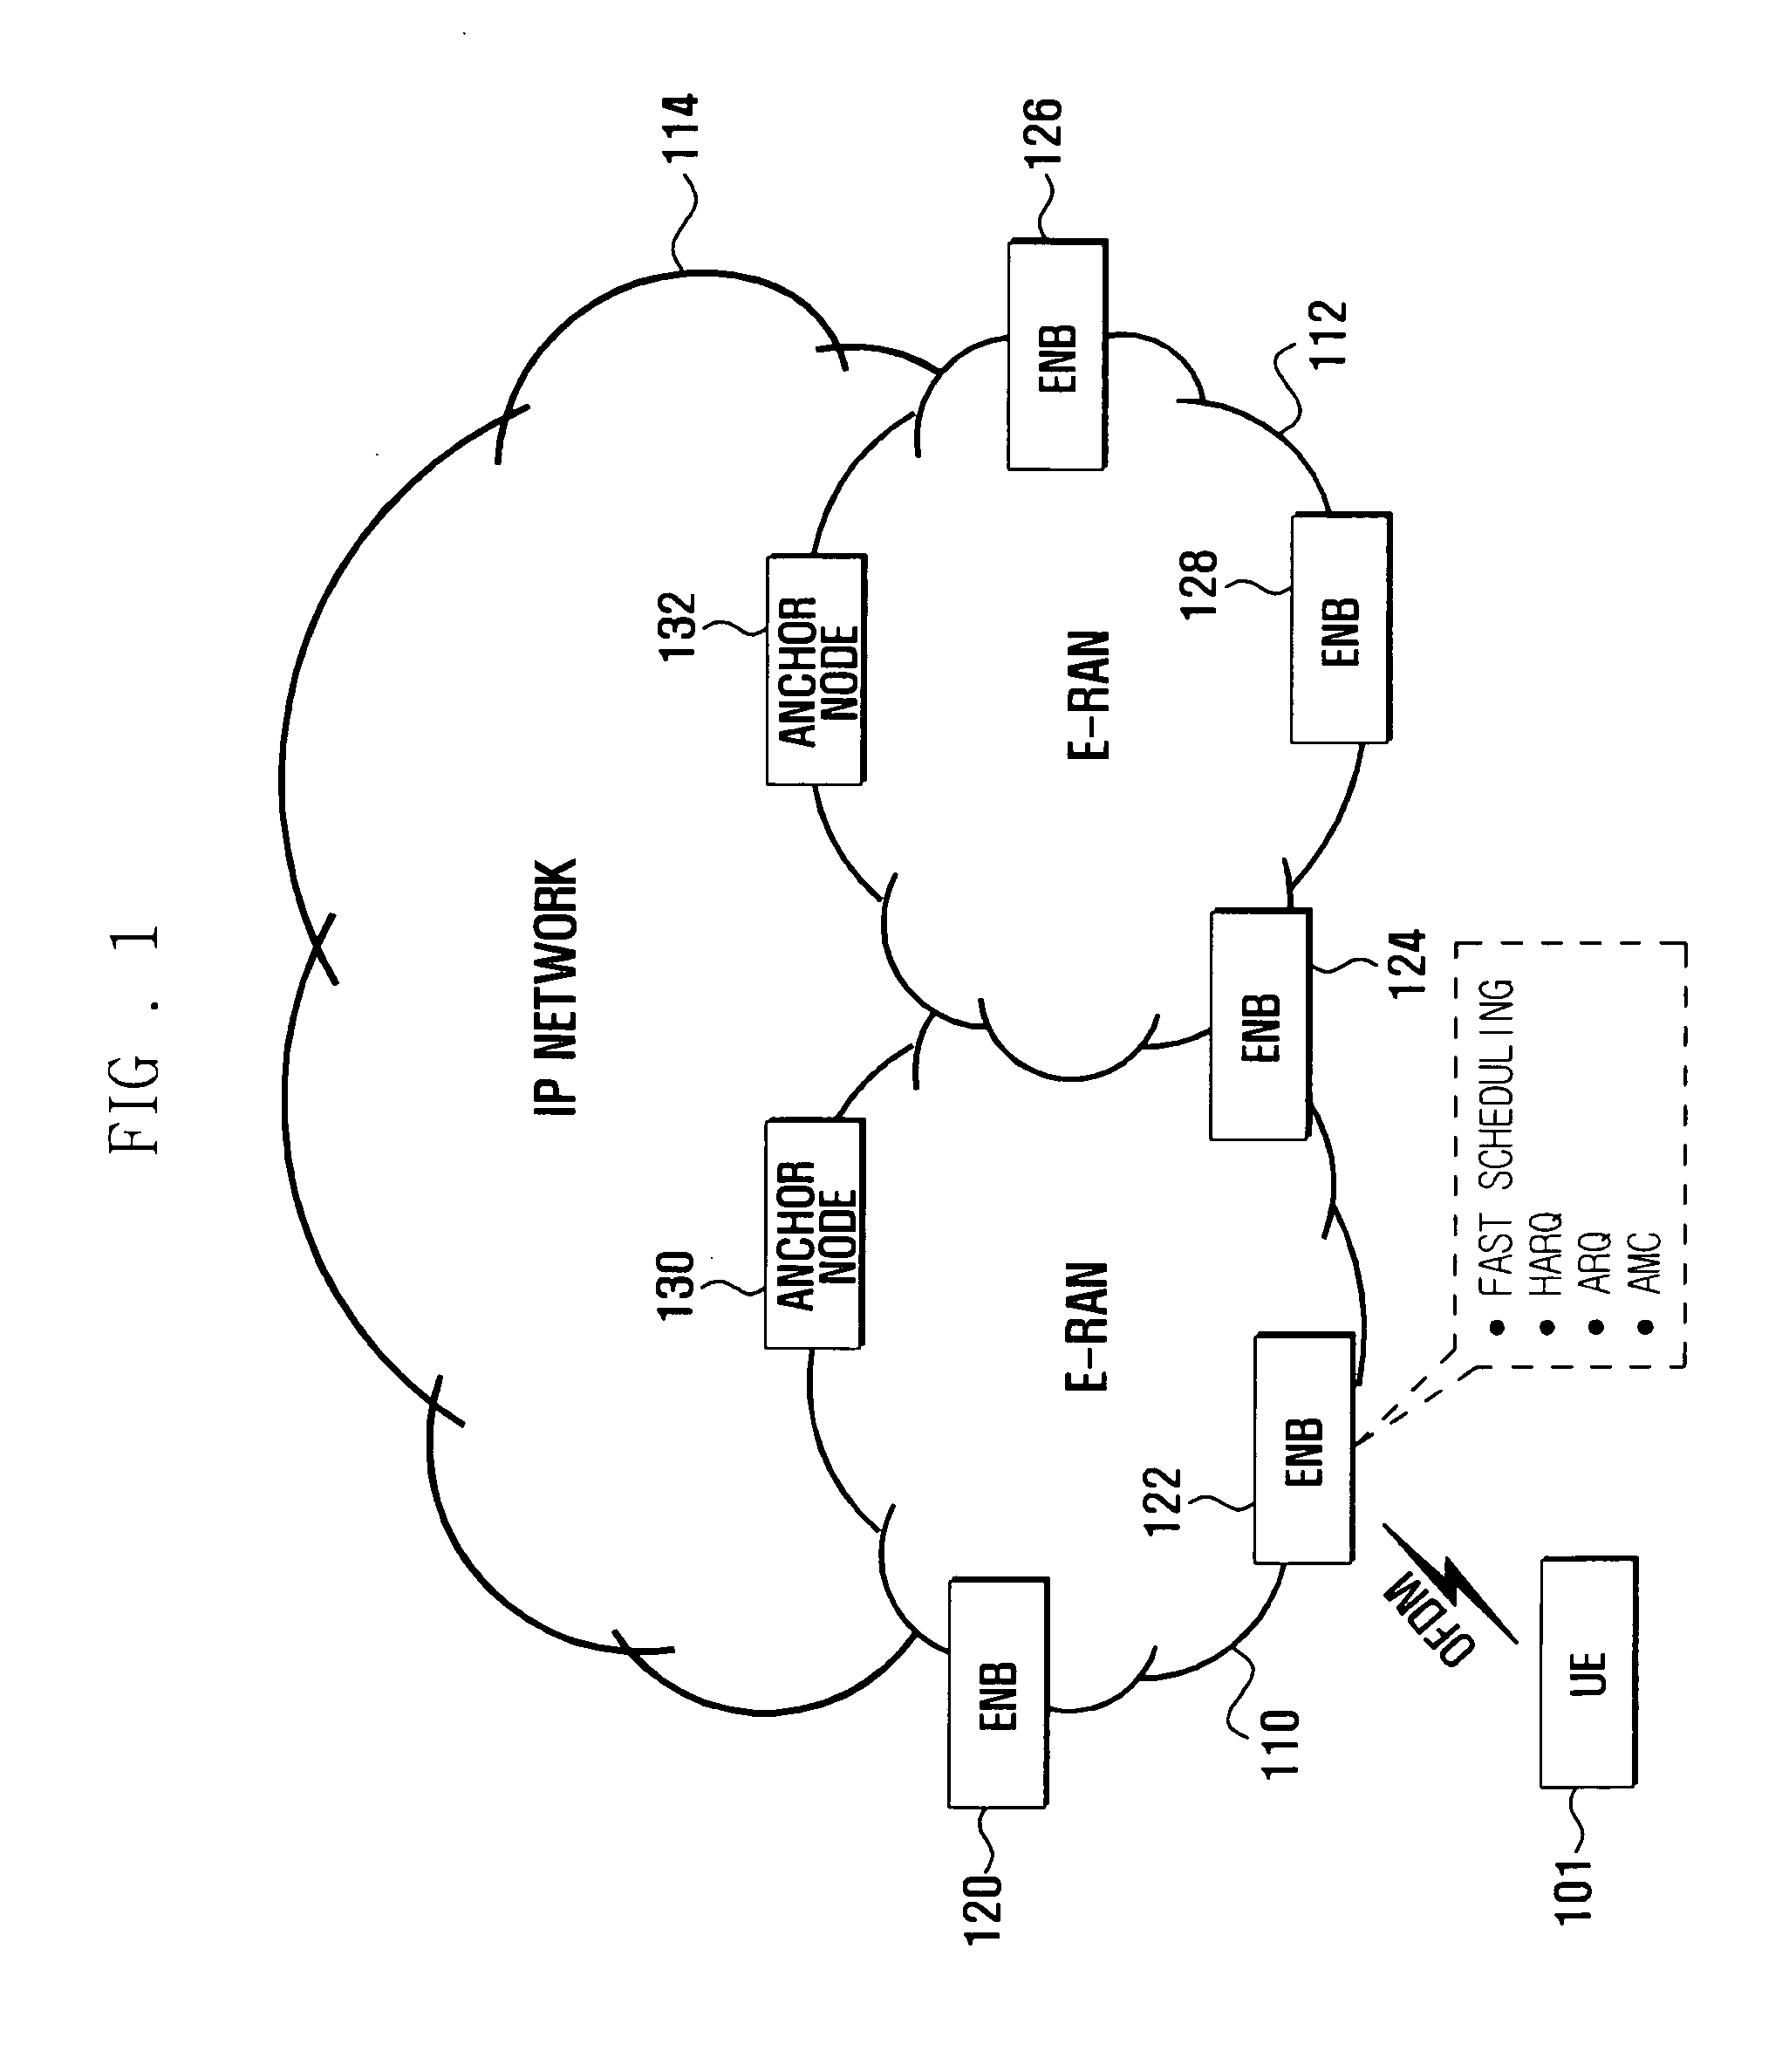 UE mobility state detection apparatus and method for wireless communication system